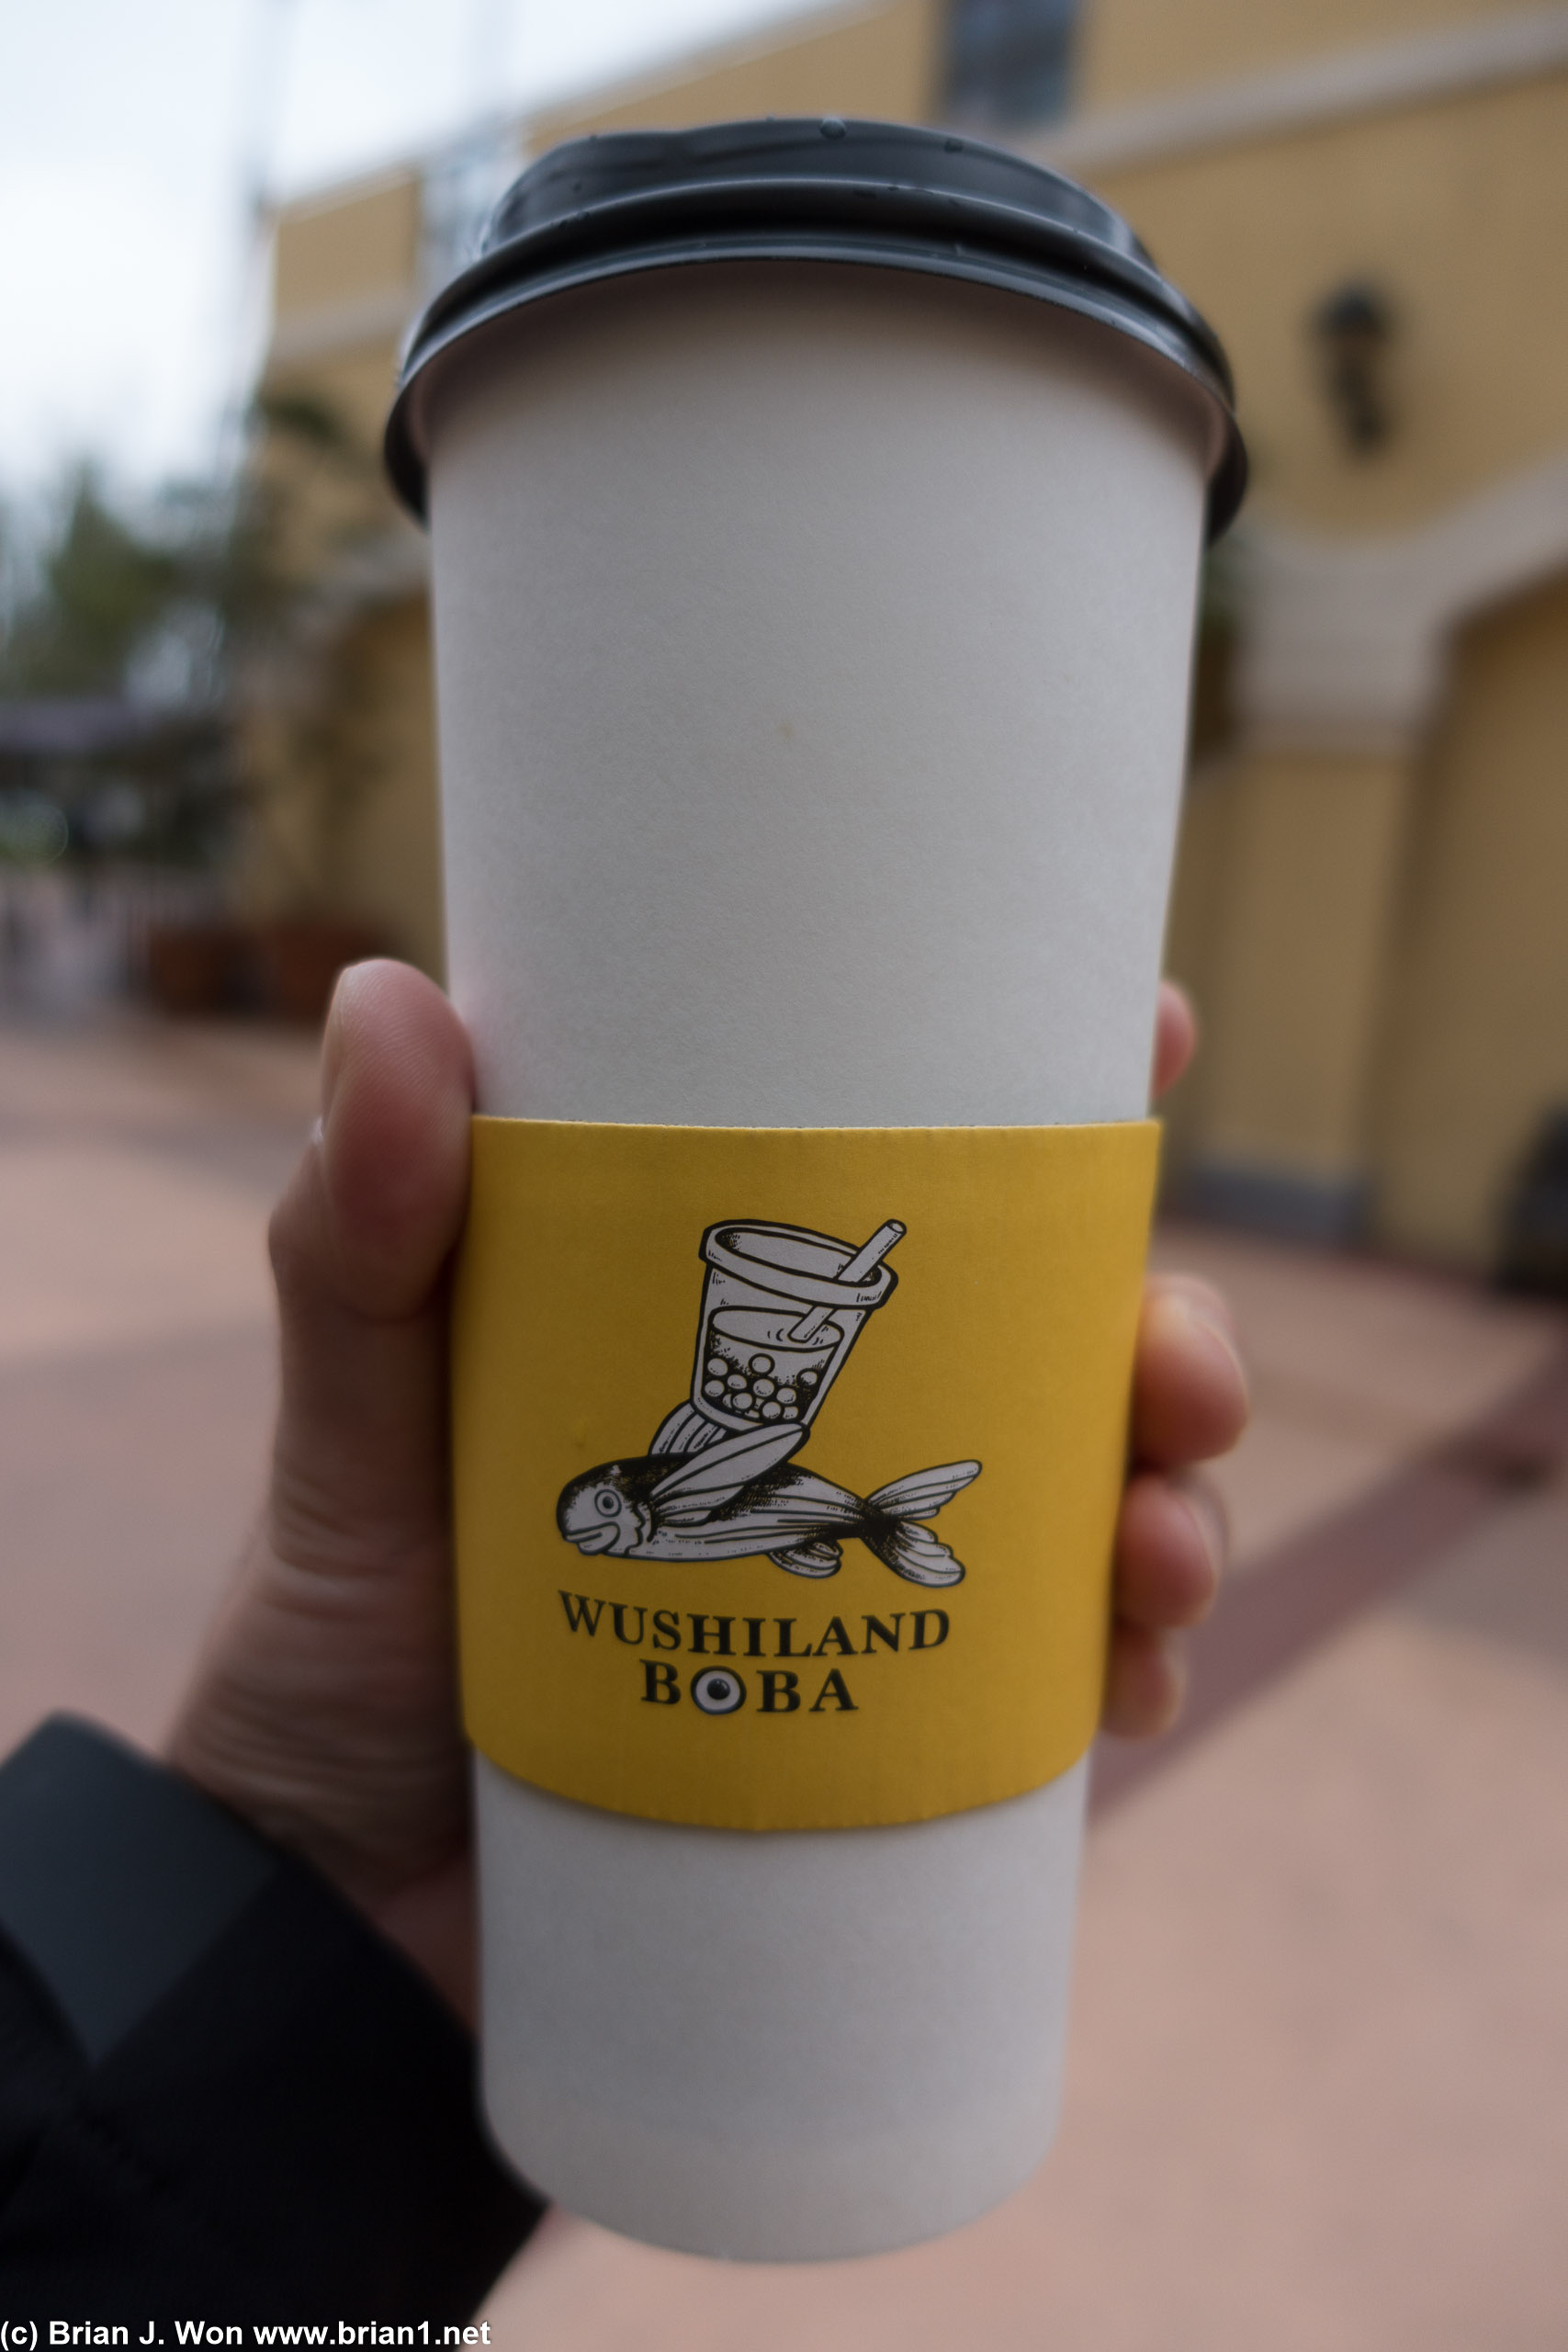 Hot roast oolong milk tea from Wushiland Boba on a cool day.